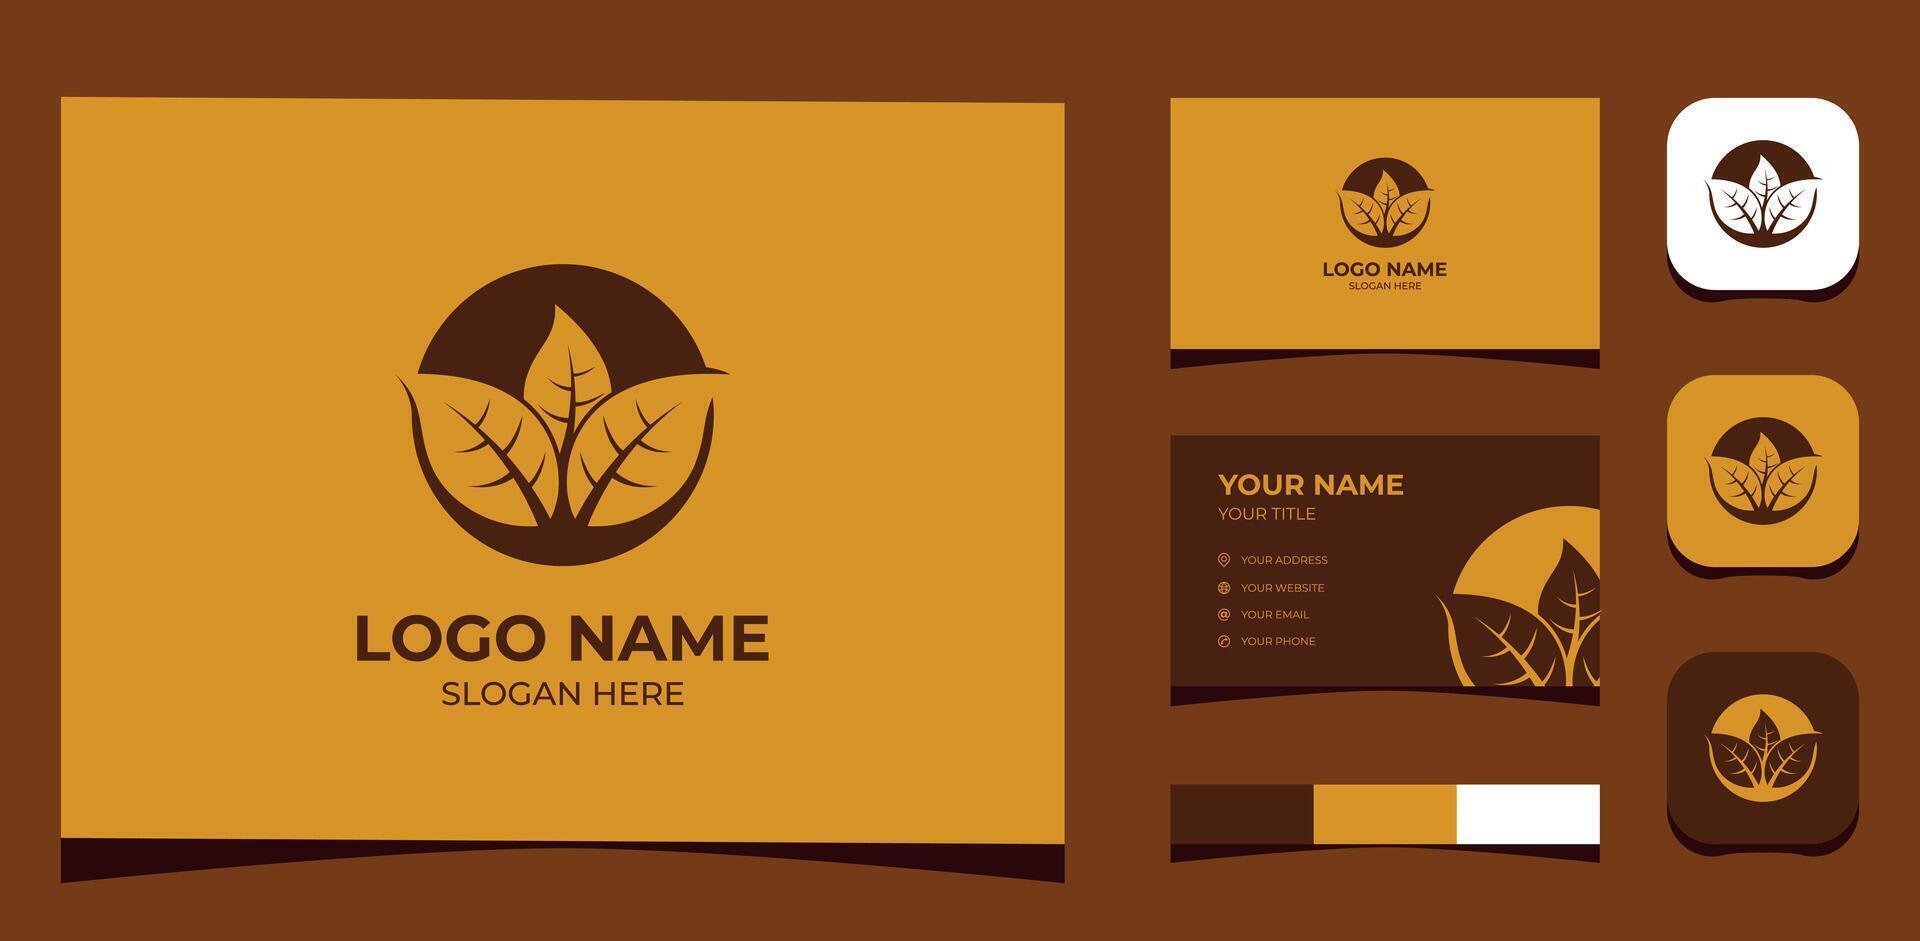 Template Logo Creative Tobacco or cigarette. Creative Template with color pallet, visual branding, business card and icon. vector